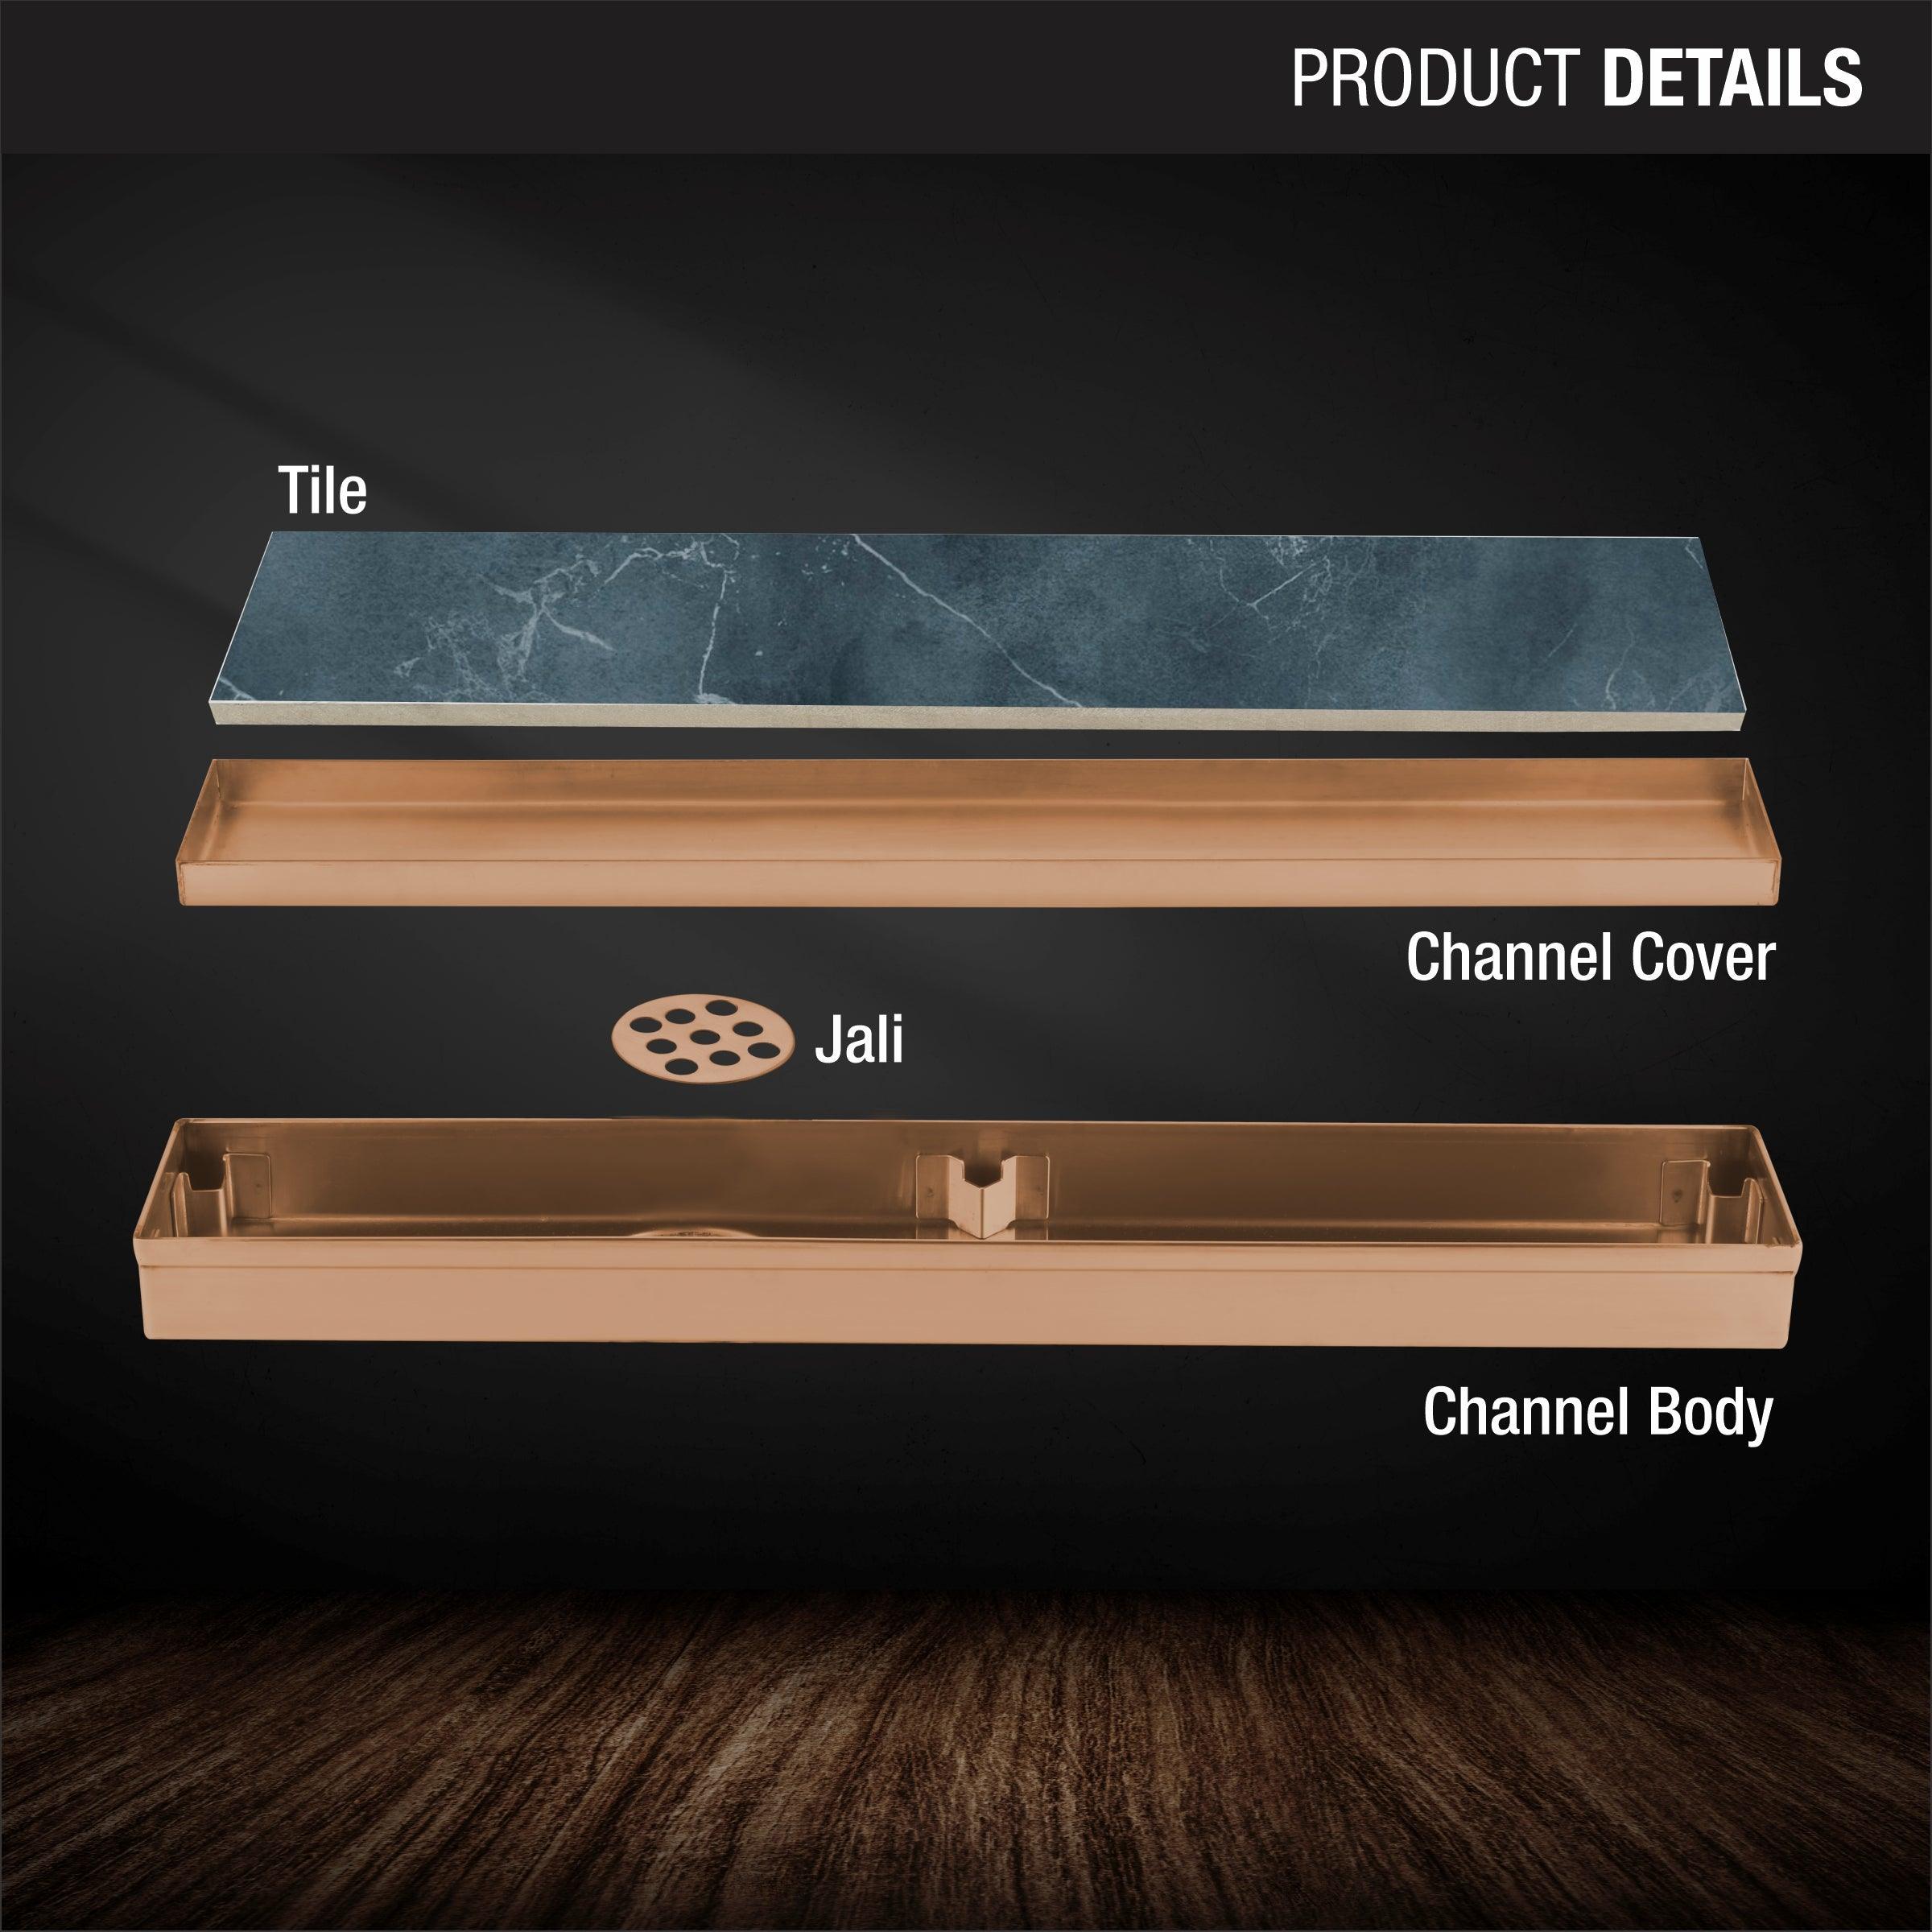 Tile Insert Shower Drain Channel - Yellow Gold (18 x 2 Inches) product details